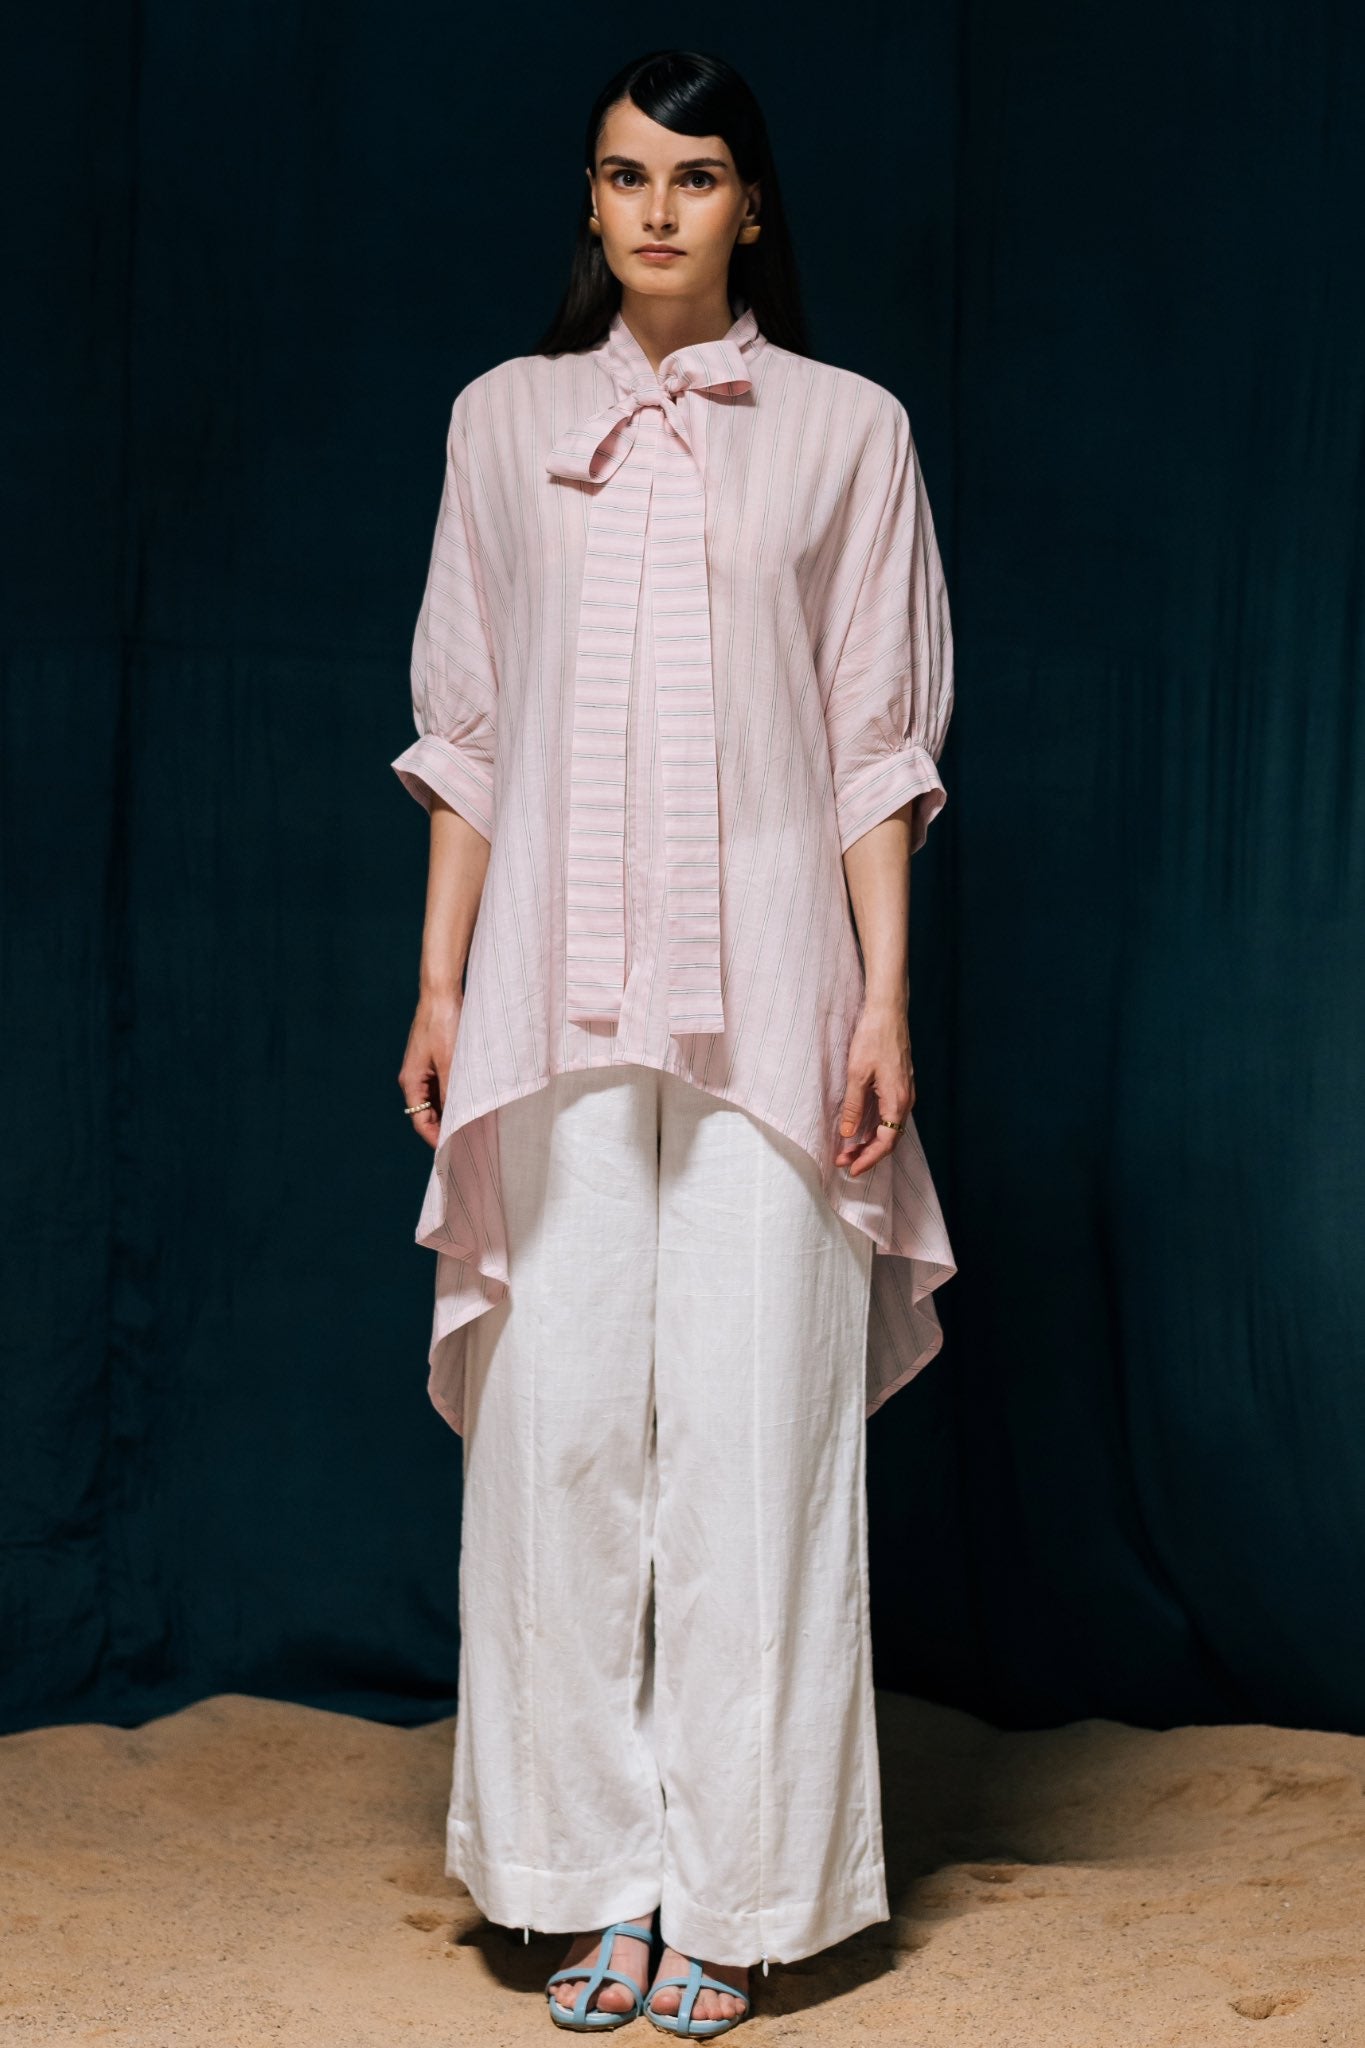 Suman Pink Tunic Shirt, Short front & Long back with cuffs and a bow - Full